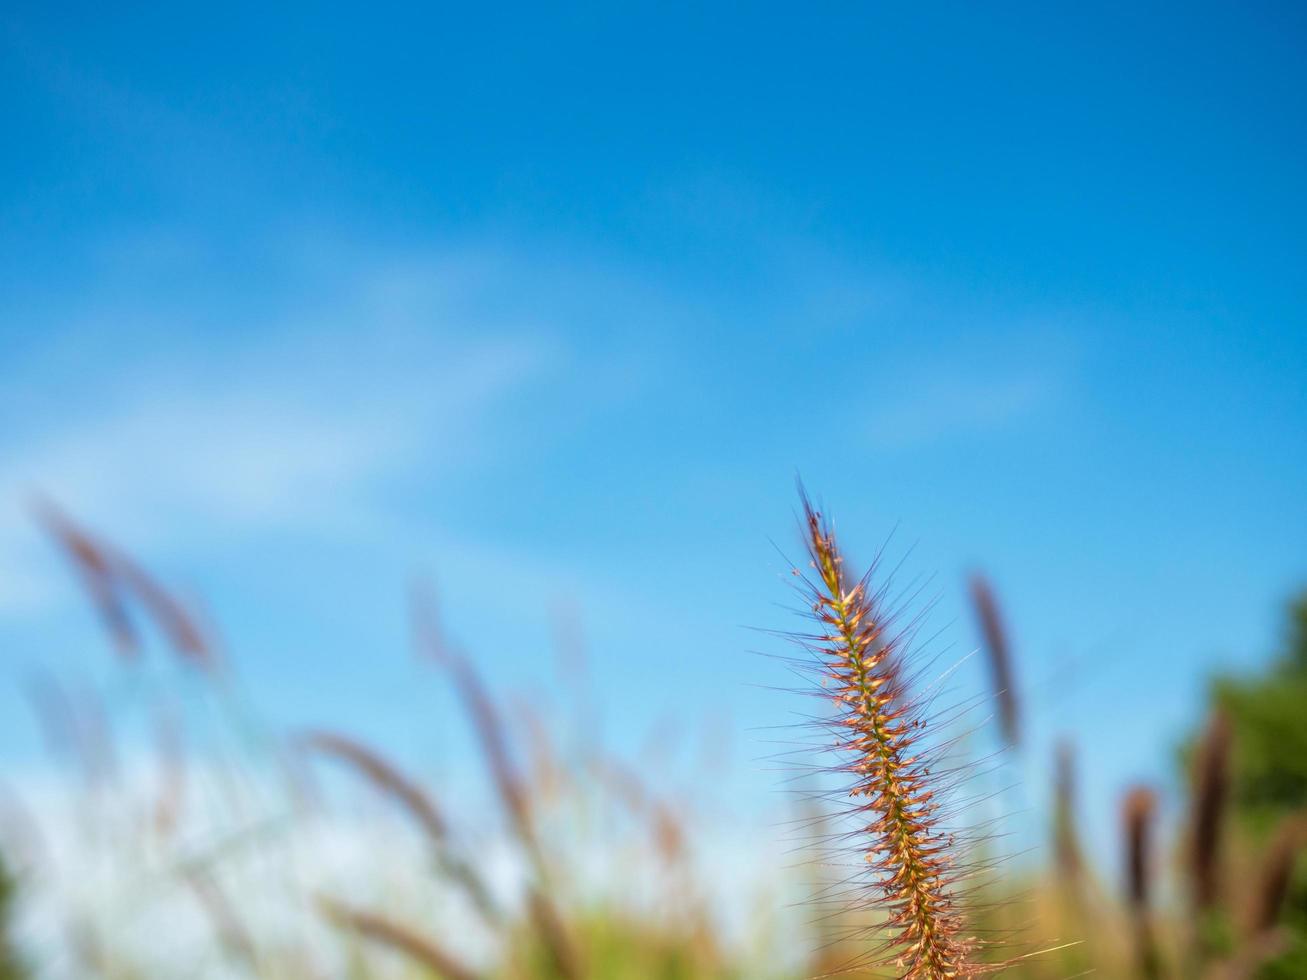 Close up of grass flowers On a sky background.soft focus images. selective focus photo